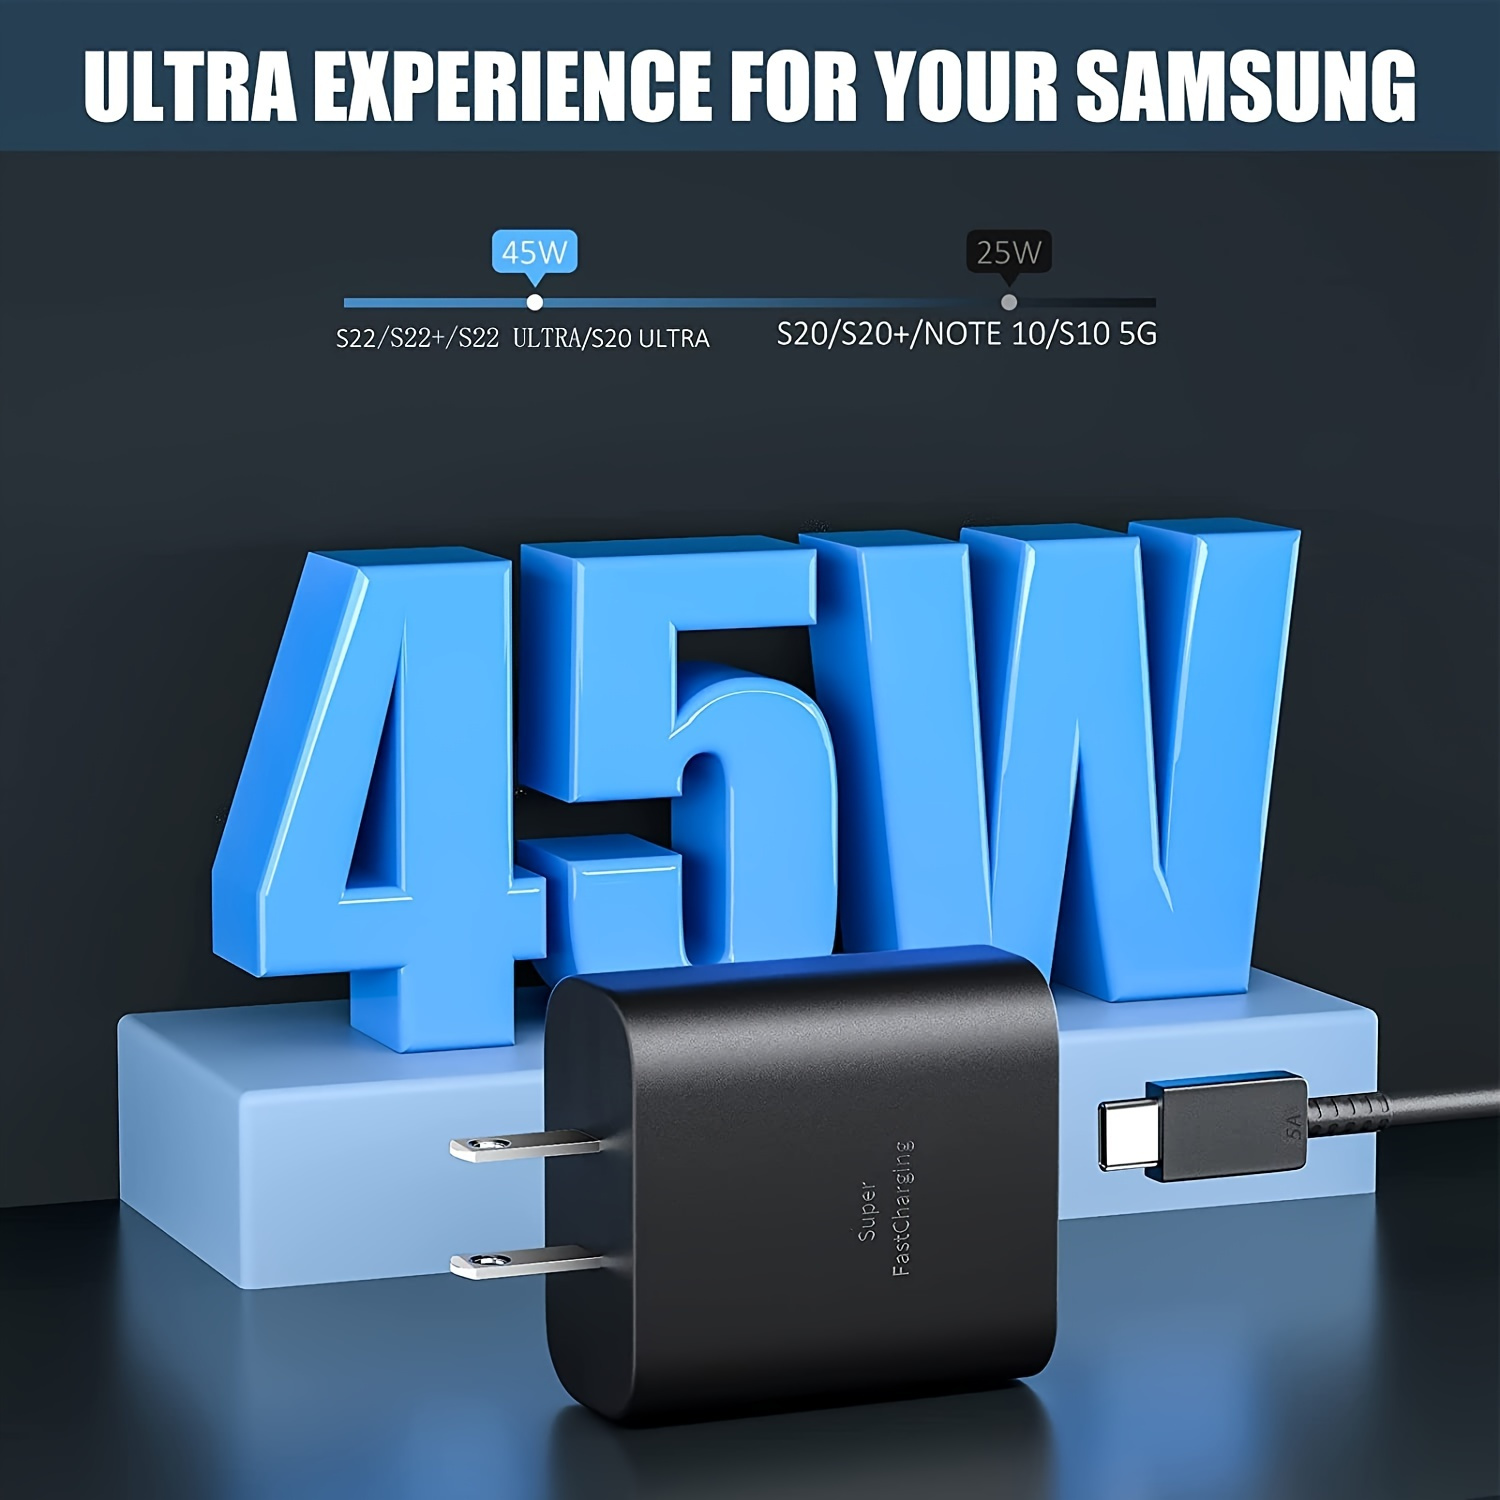 Chargeurs,Samsung chargeur 45W Original Super rapide Charge 5A